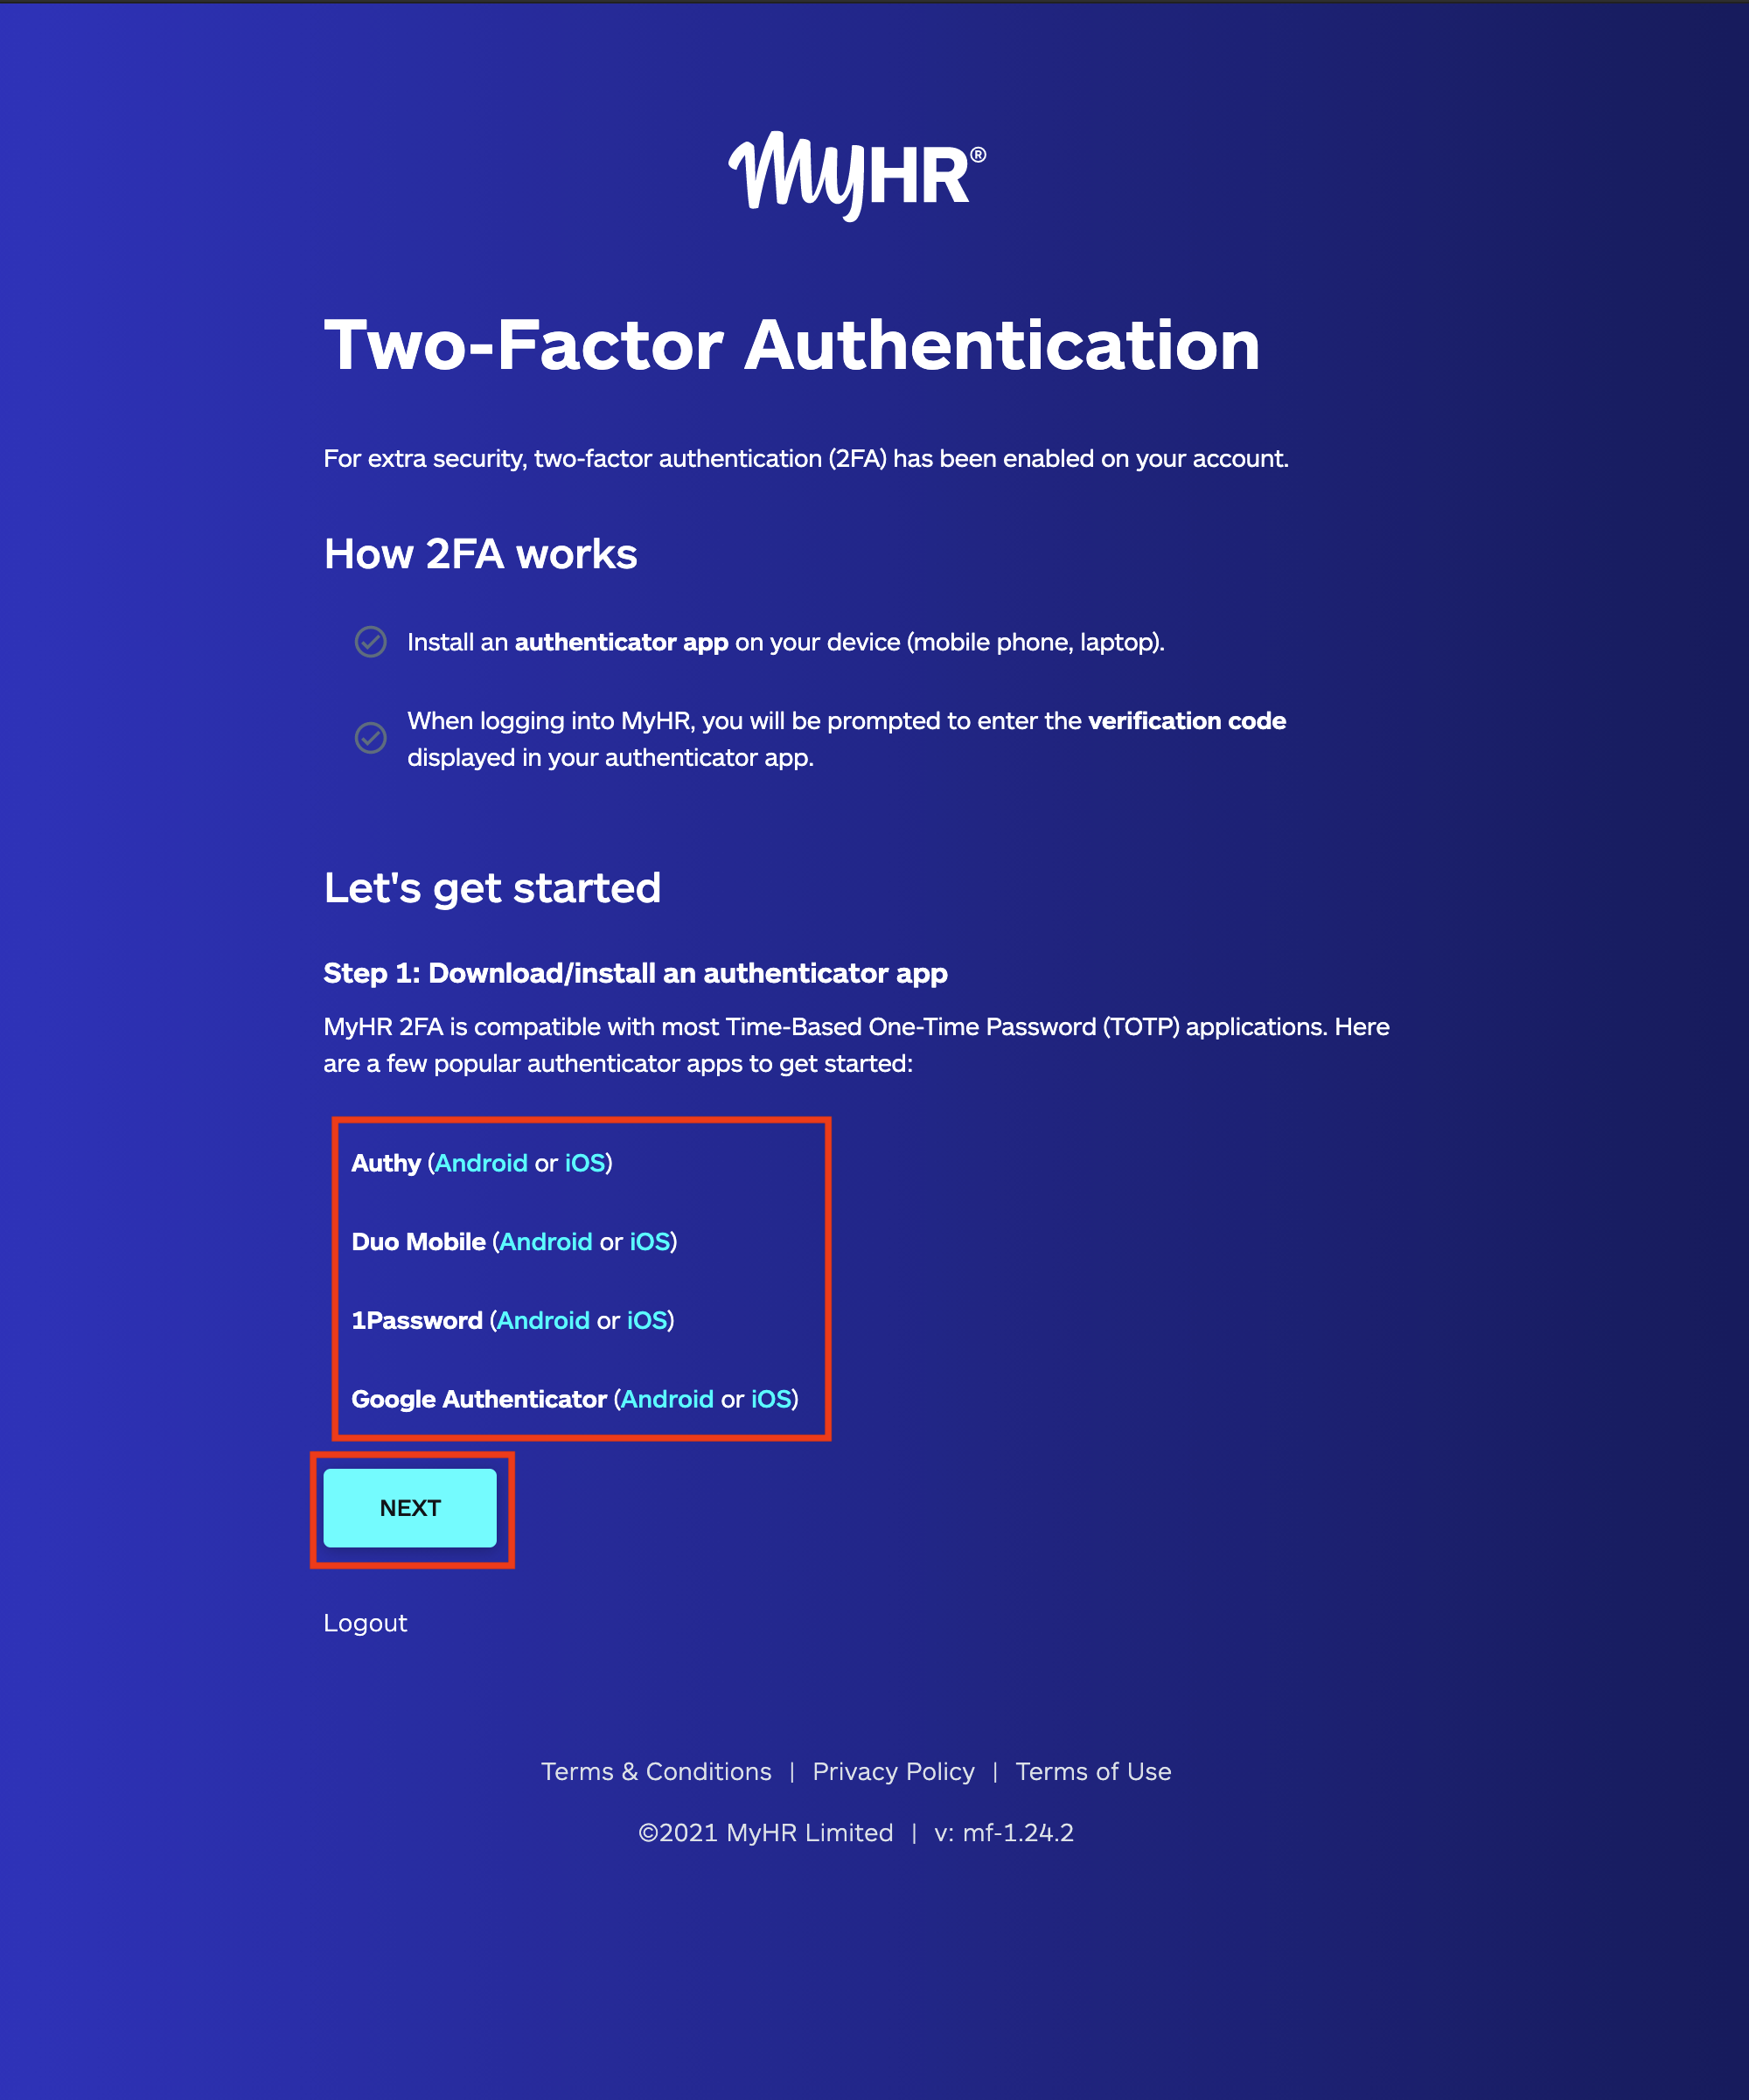 About Two-Factor Authentication (2FA)